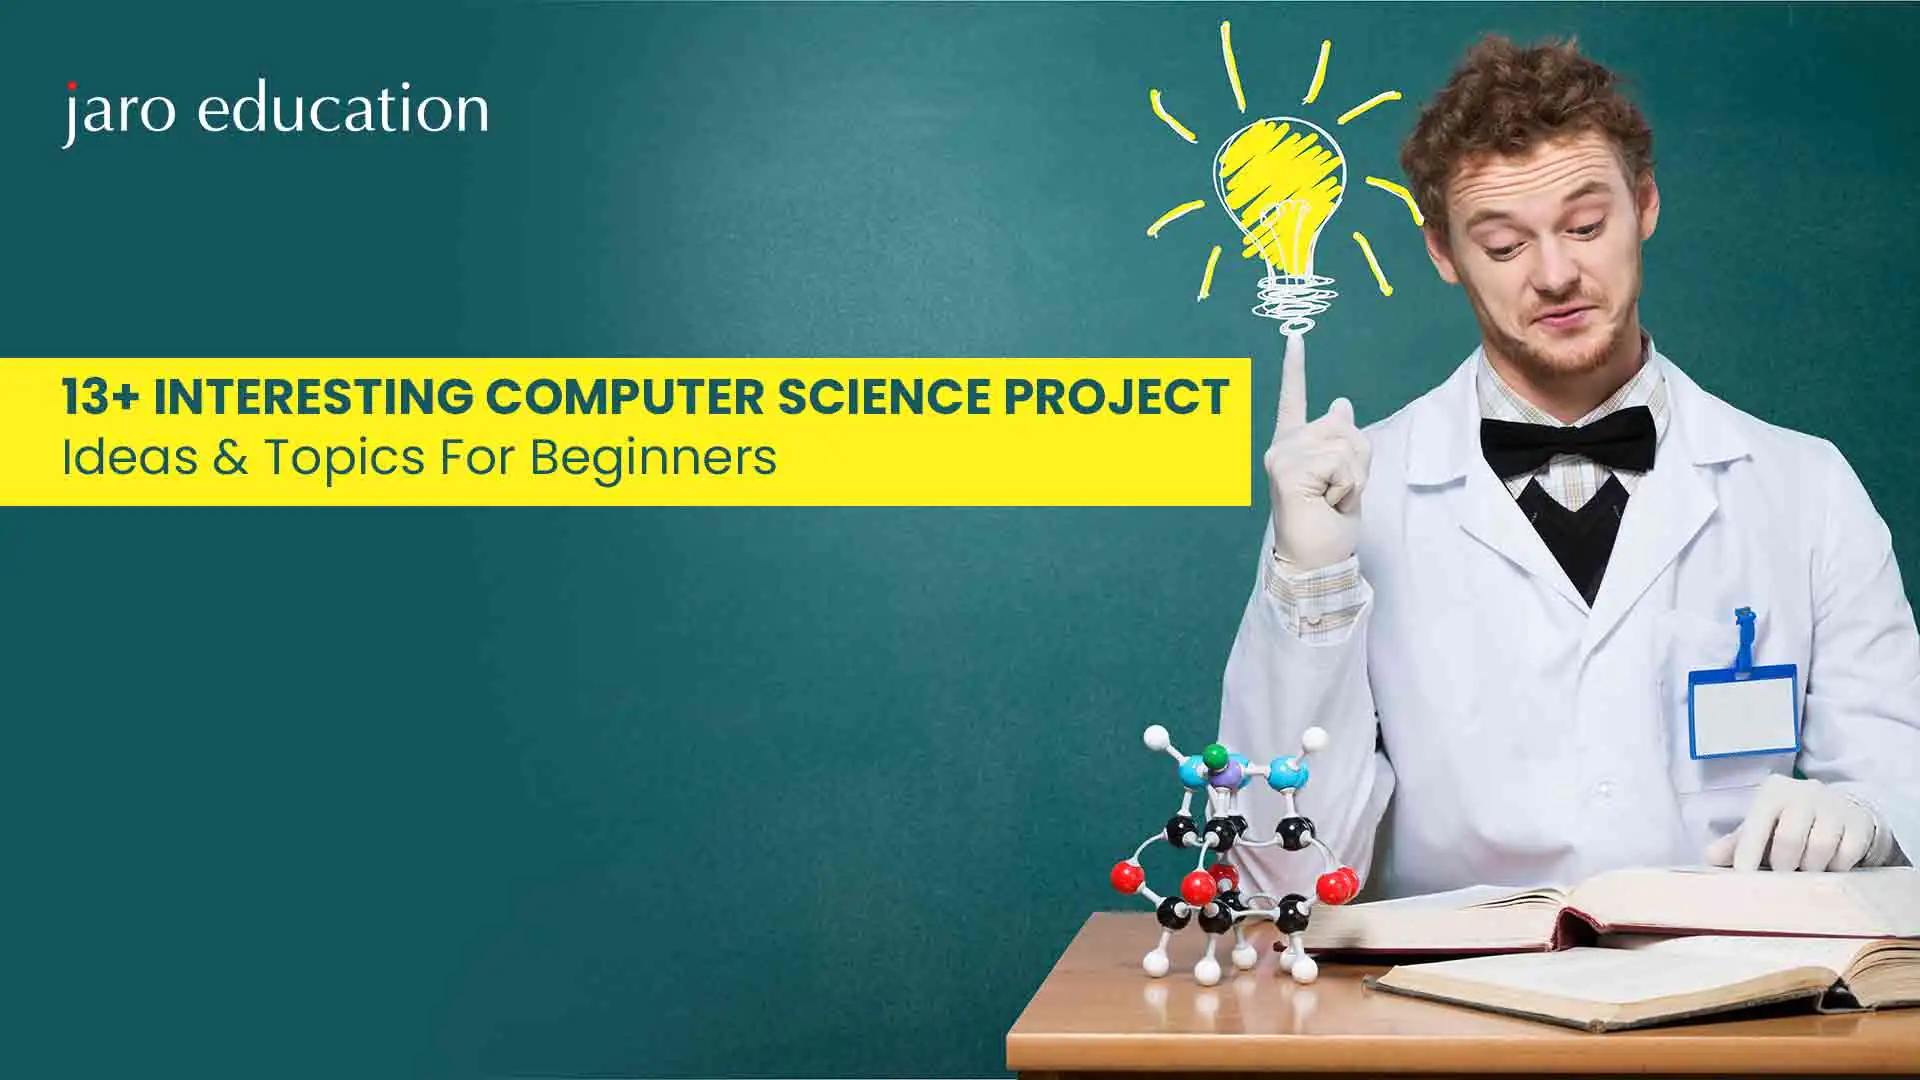 13+ Interesting Computer Science Project Ideas & Topics For Beginners